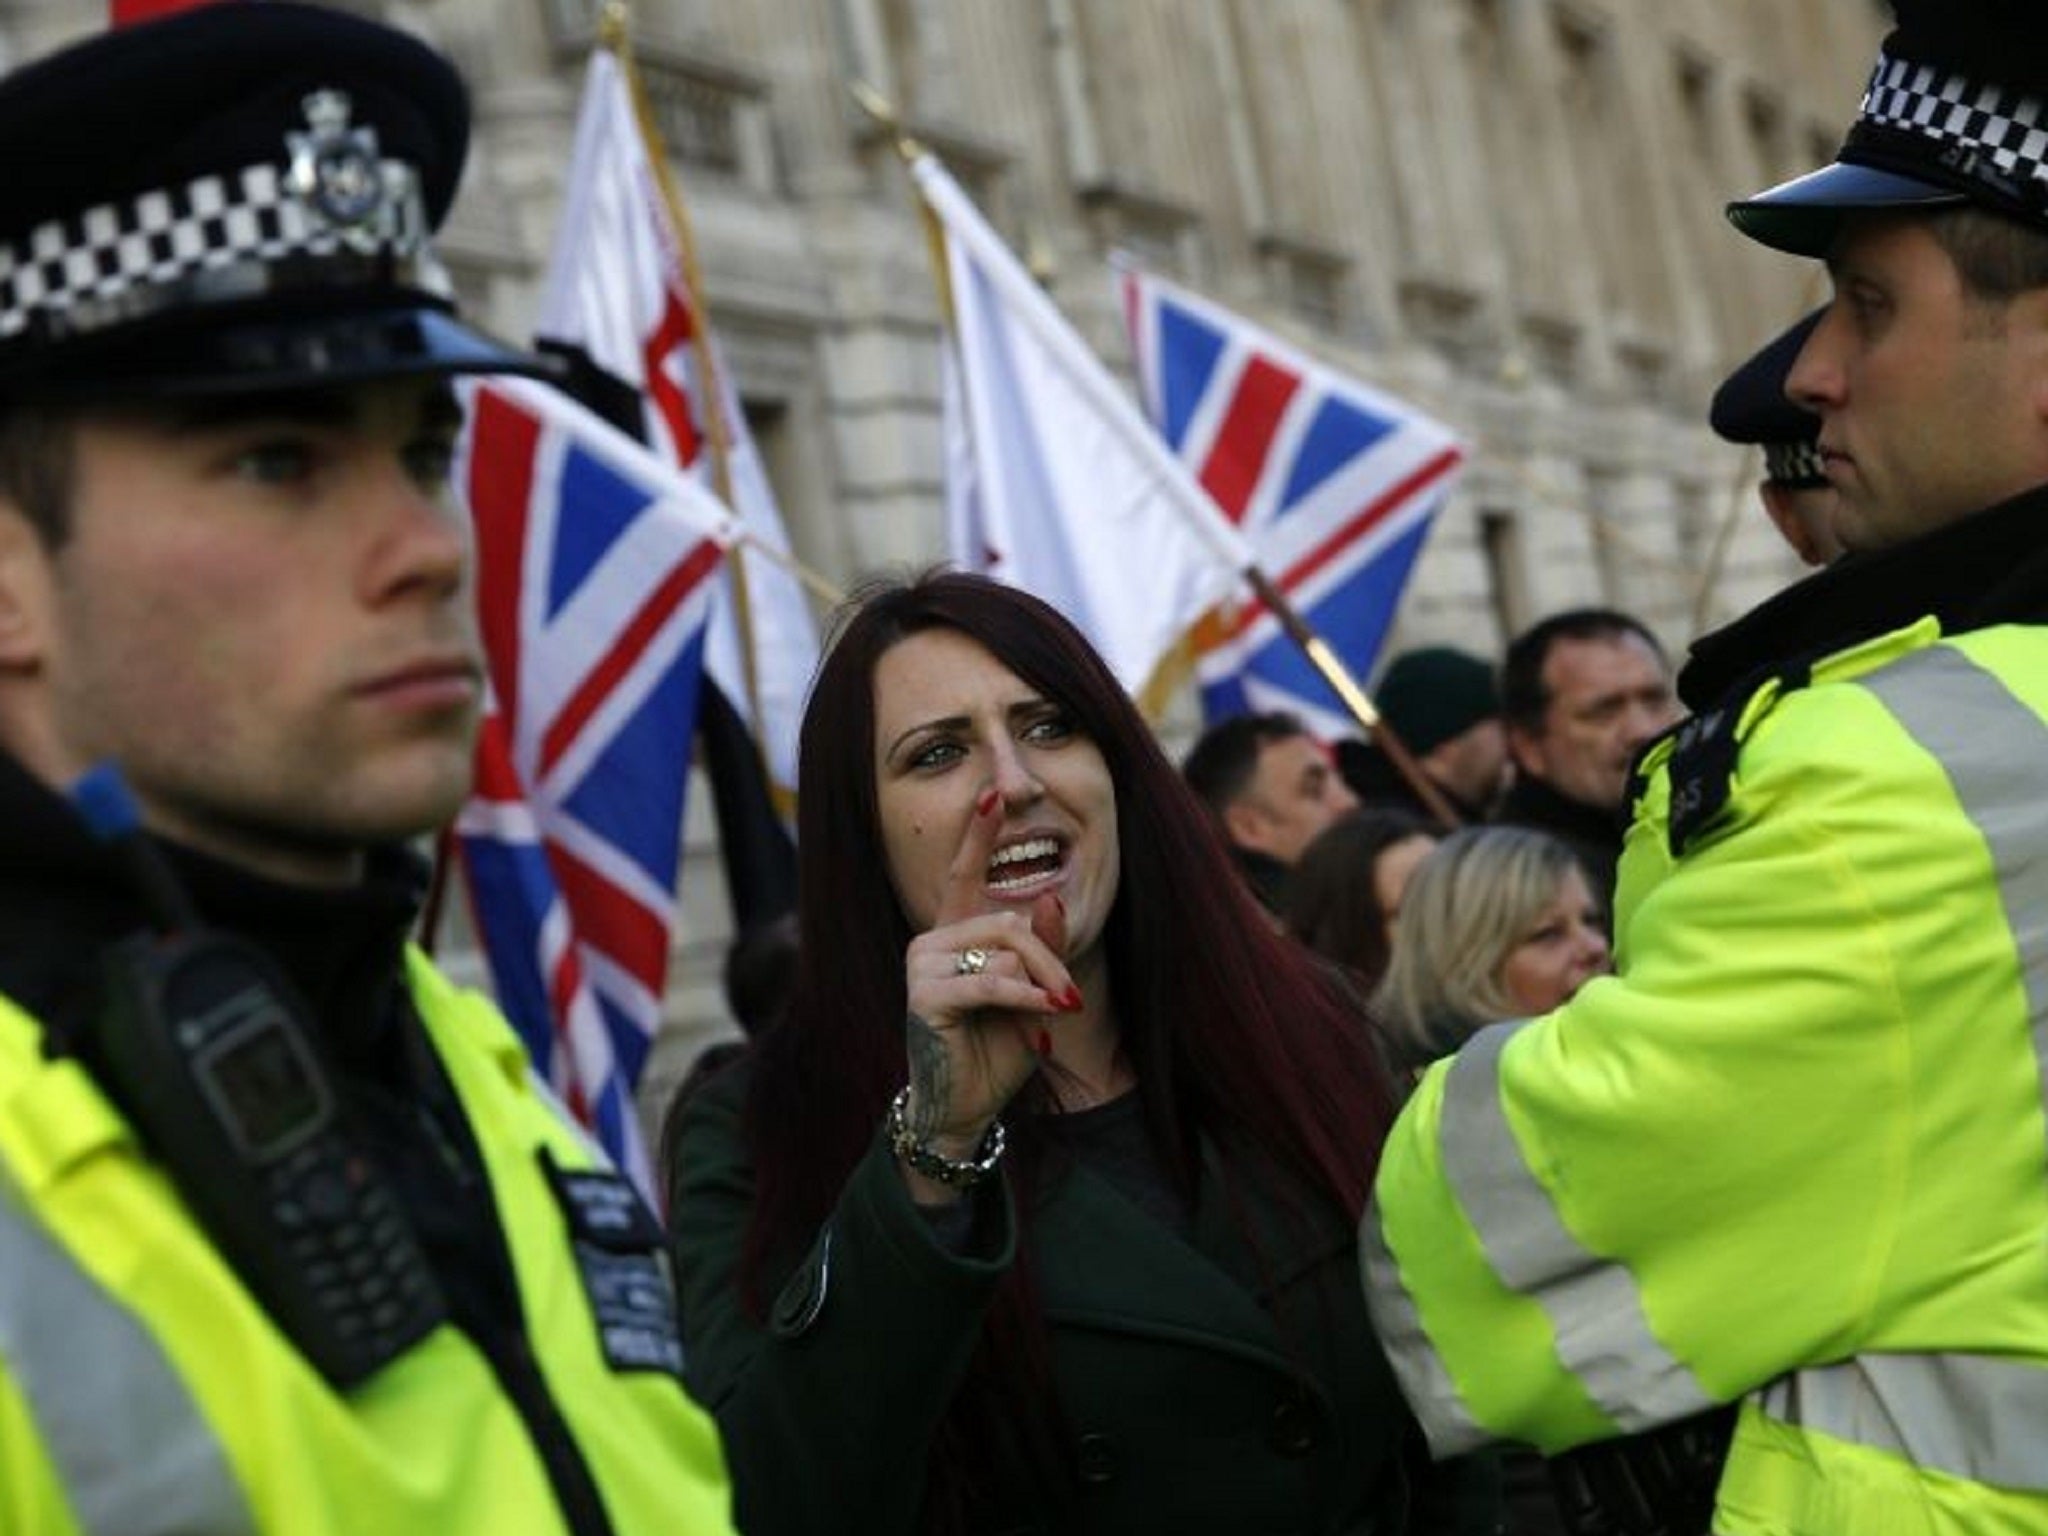 A Britain First member being watched over by police officers